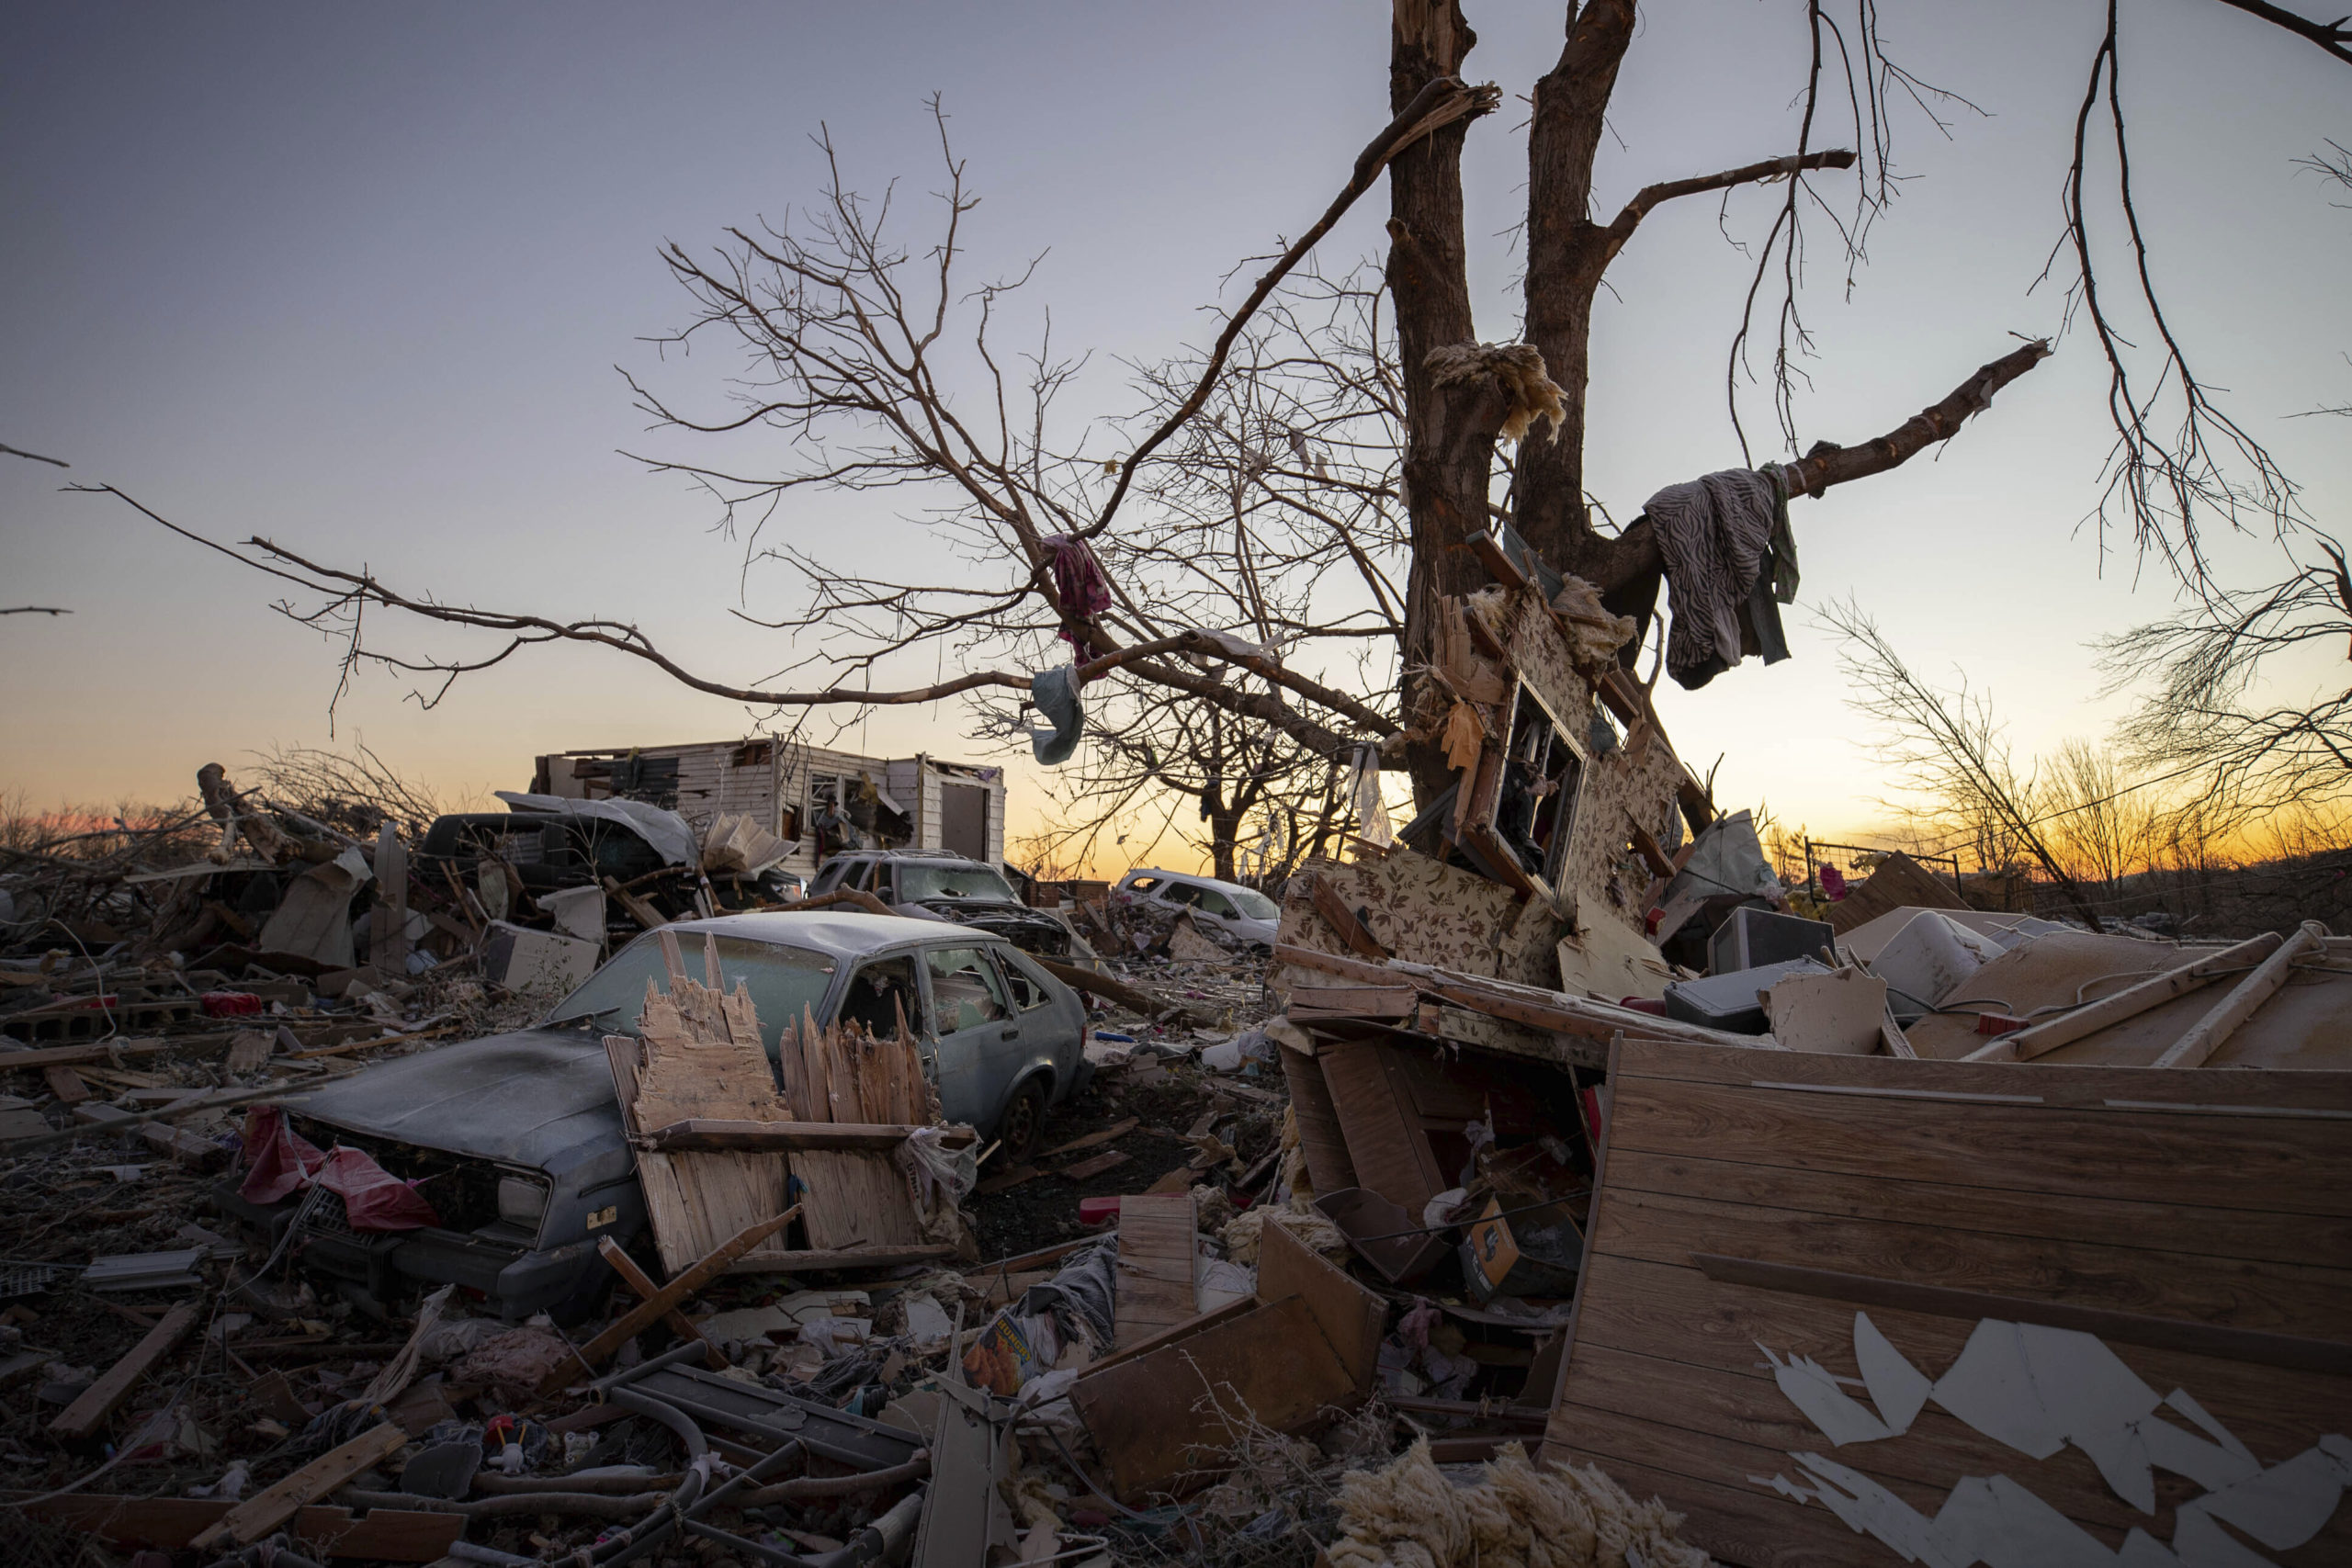 A car sits among the remains of a destroyed house after a tornado in Dawson Springs, Ky., Sunday, D...